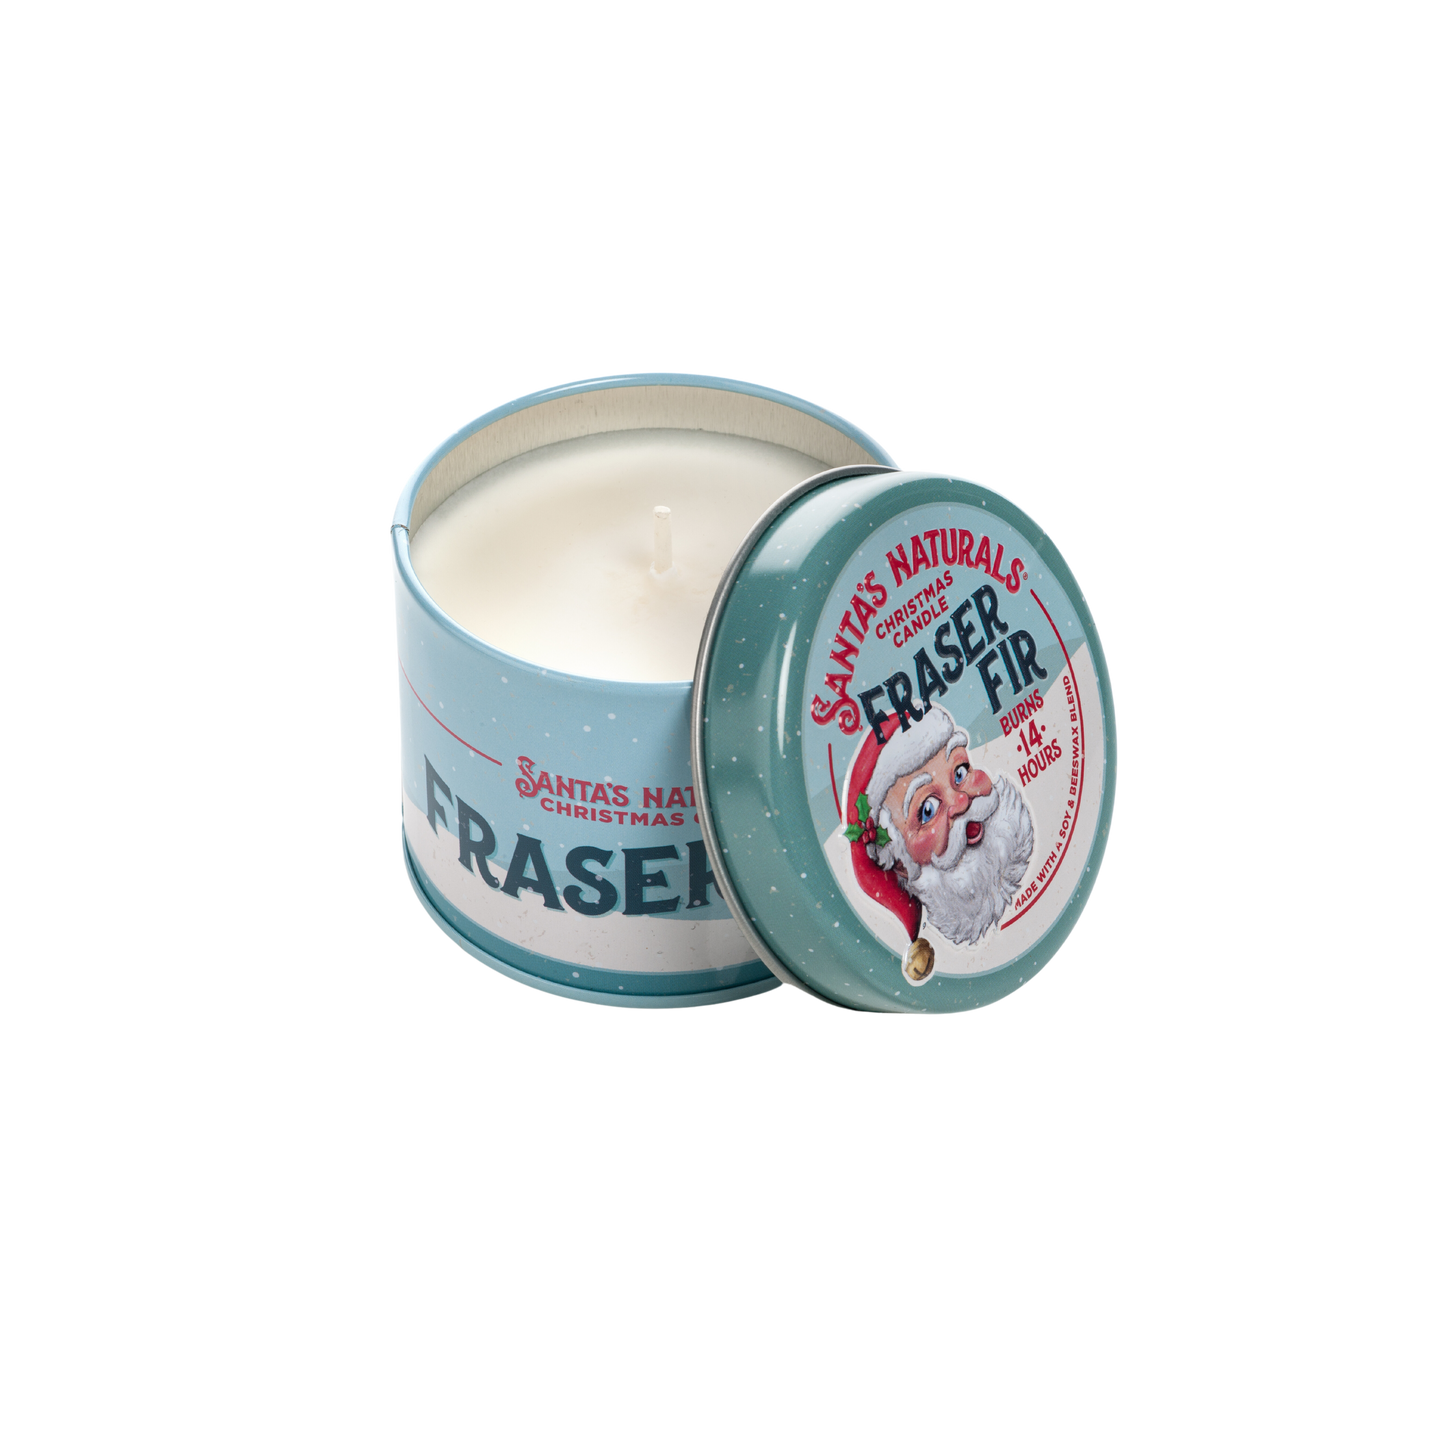 Santa's Naturals Fraser Fir Mini Candle Singles-Case of 6 - Table Top Display